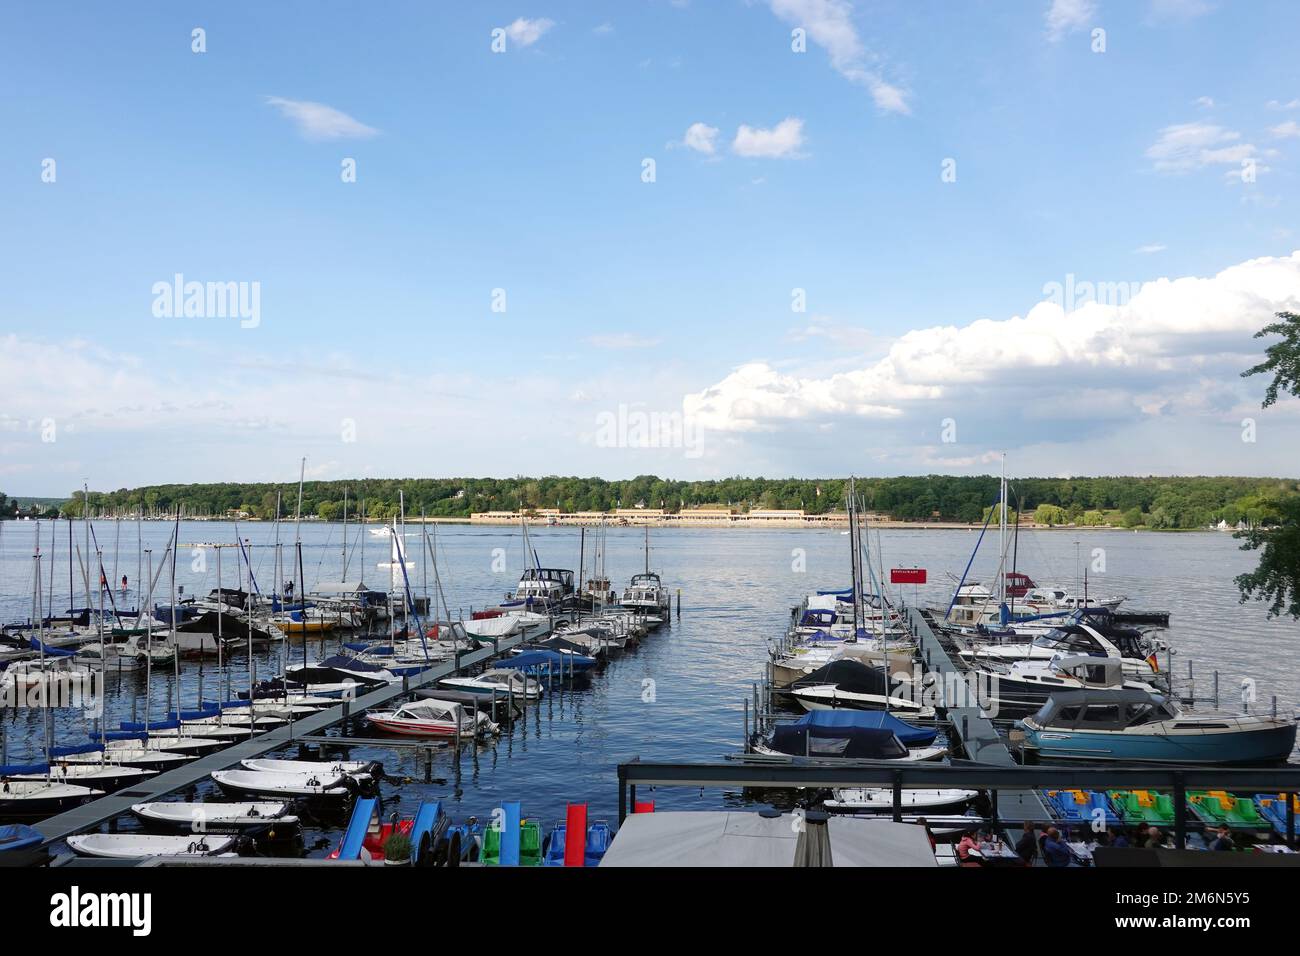 View over jetties across the Grossen Wannsee to the lido Stock Photo